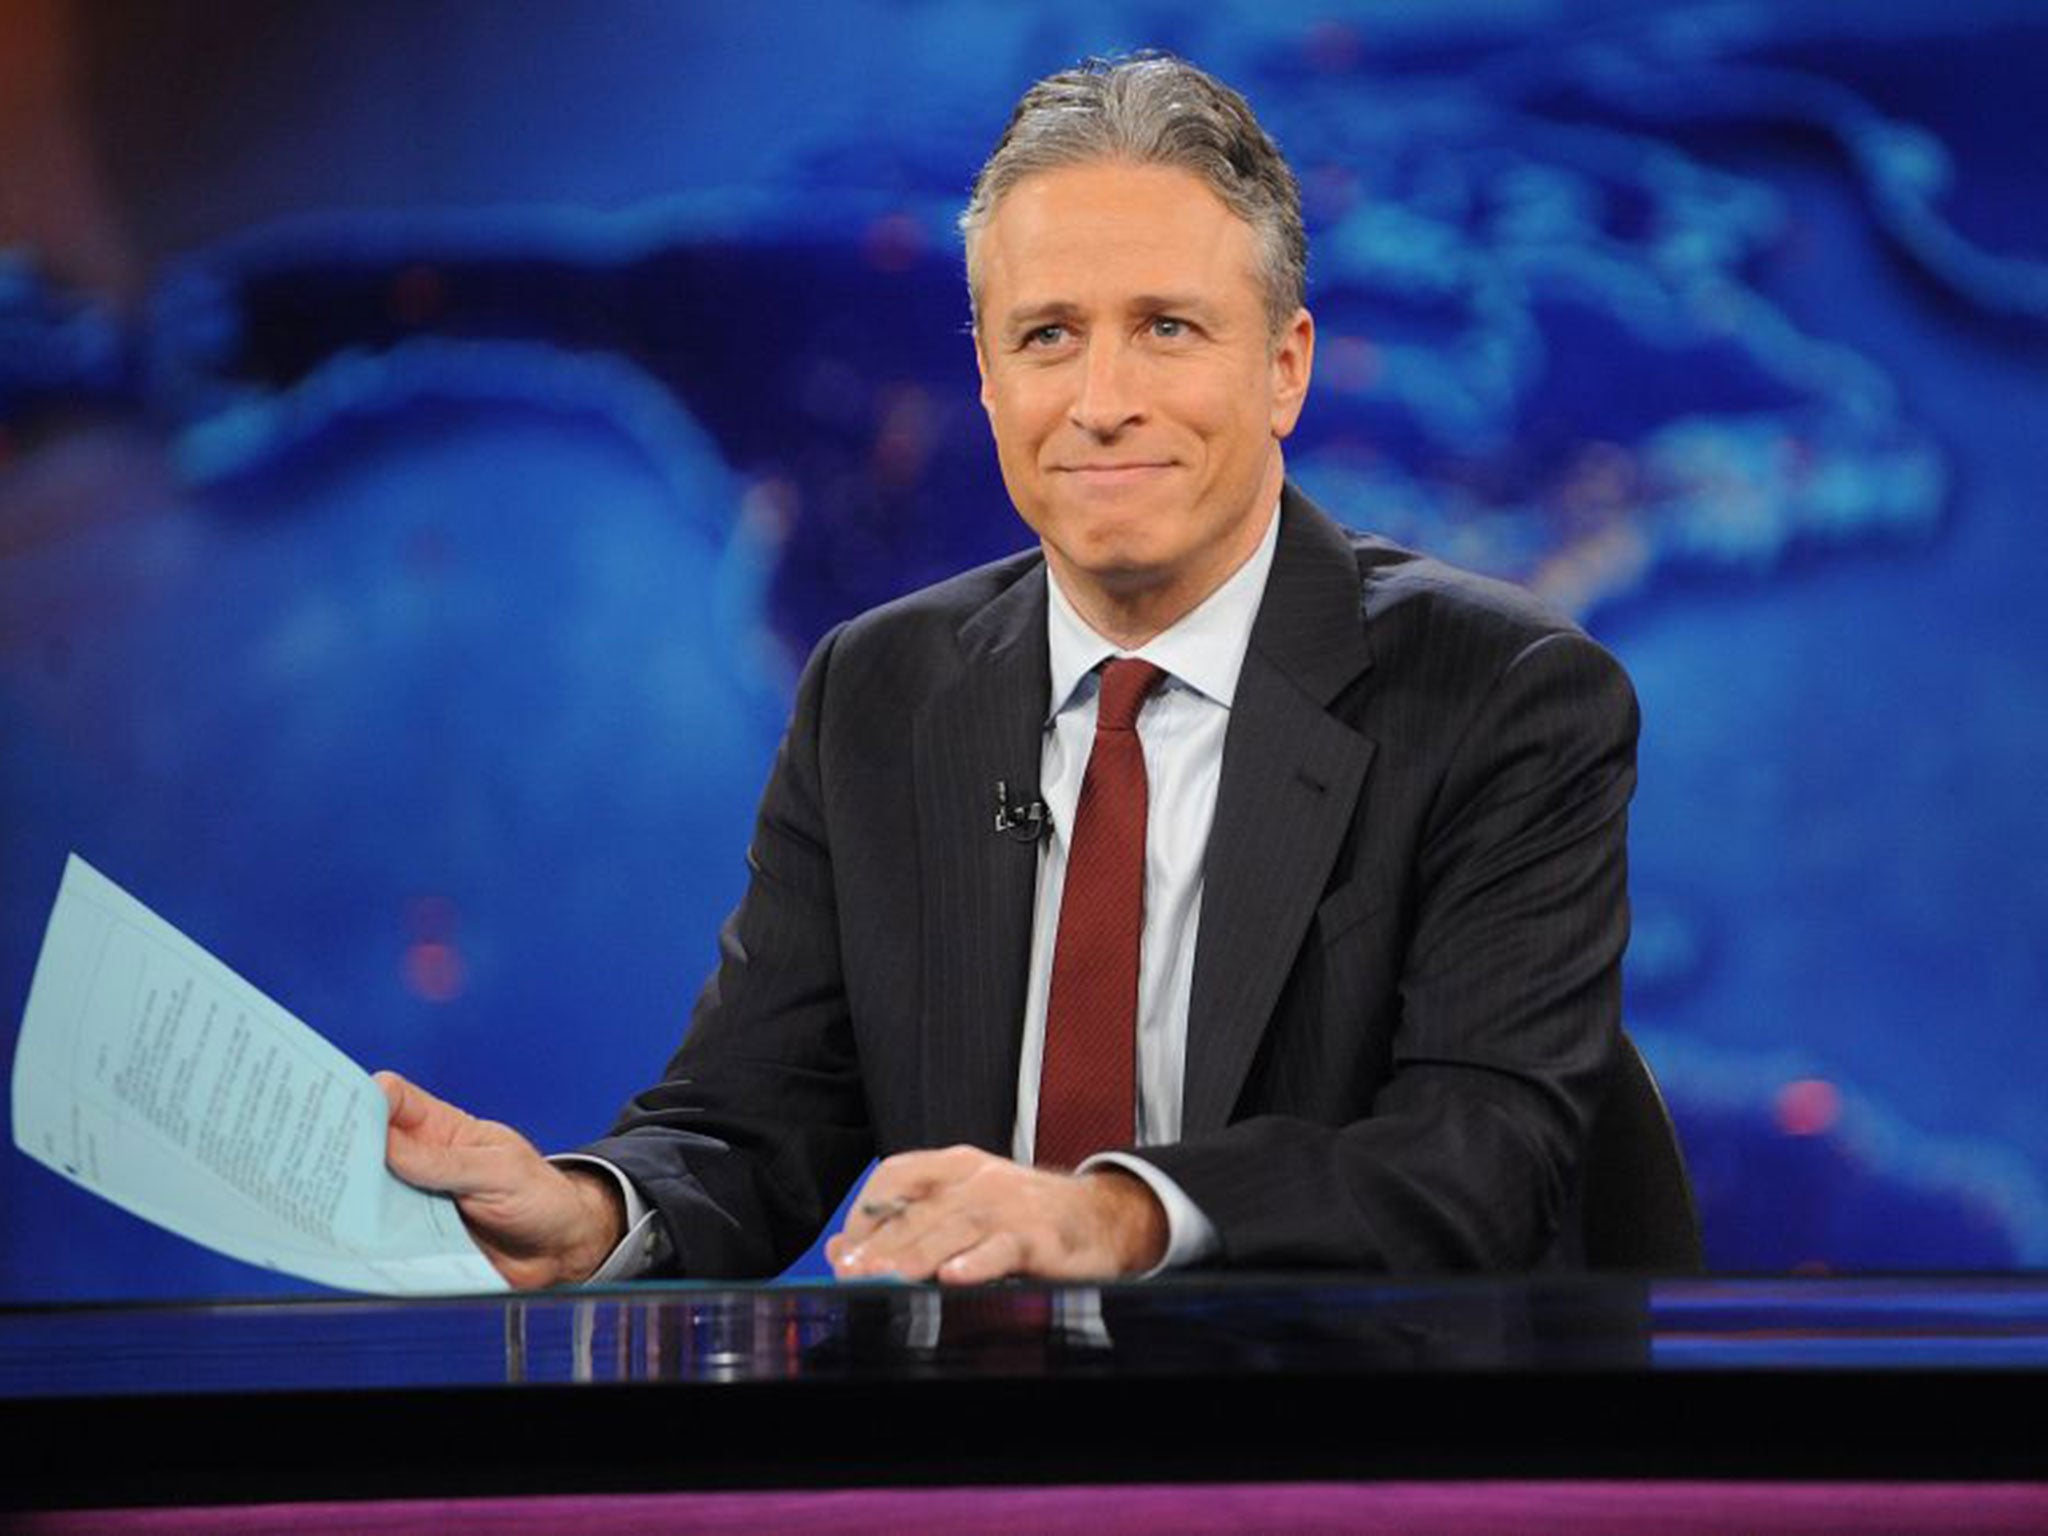 Jon Stewart during a taping of "The Daily Show with Jon Stewart" in New York